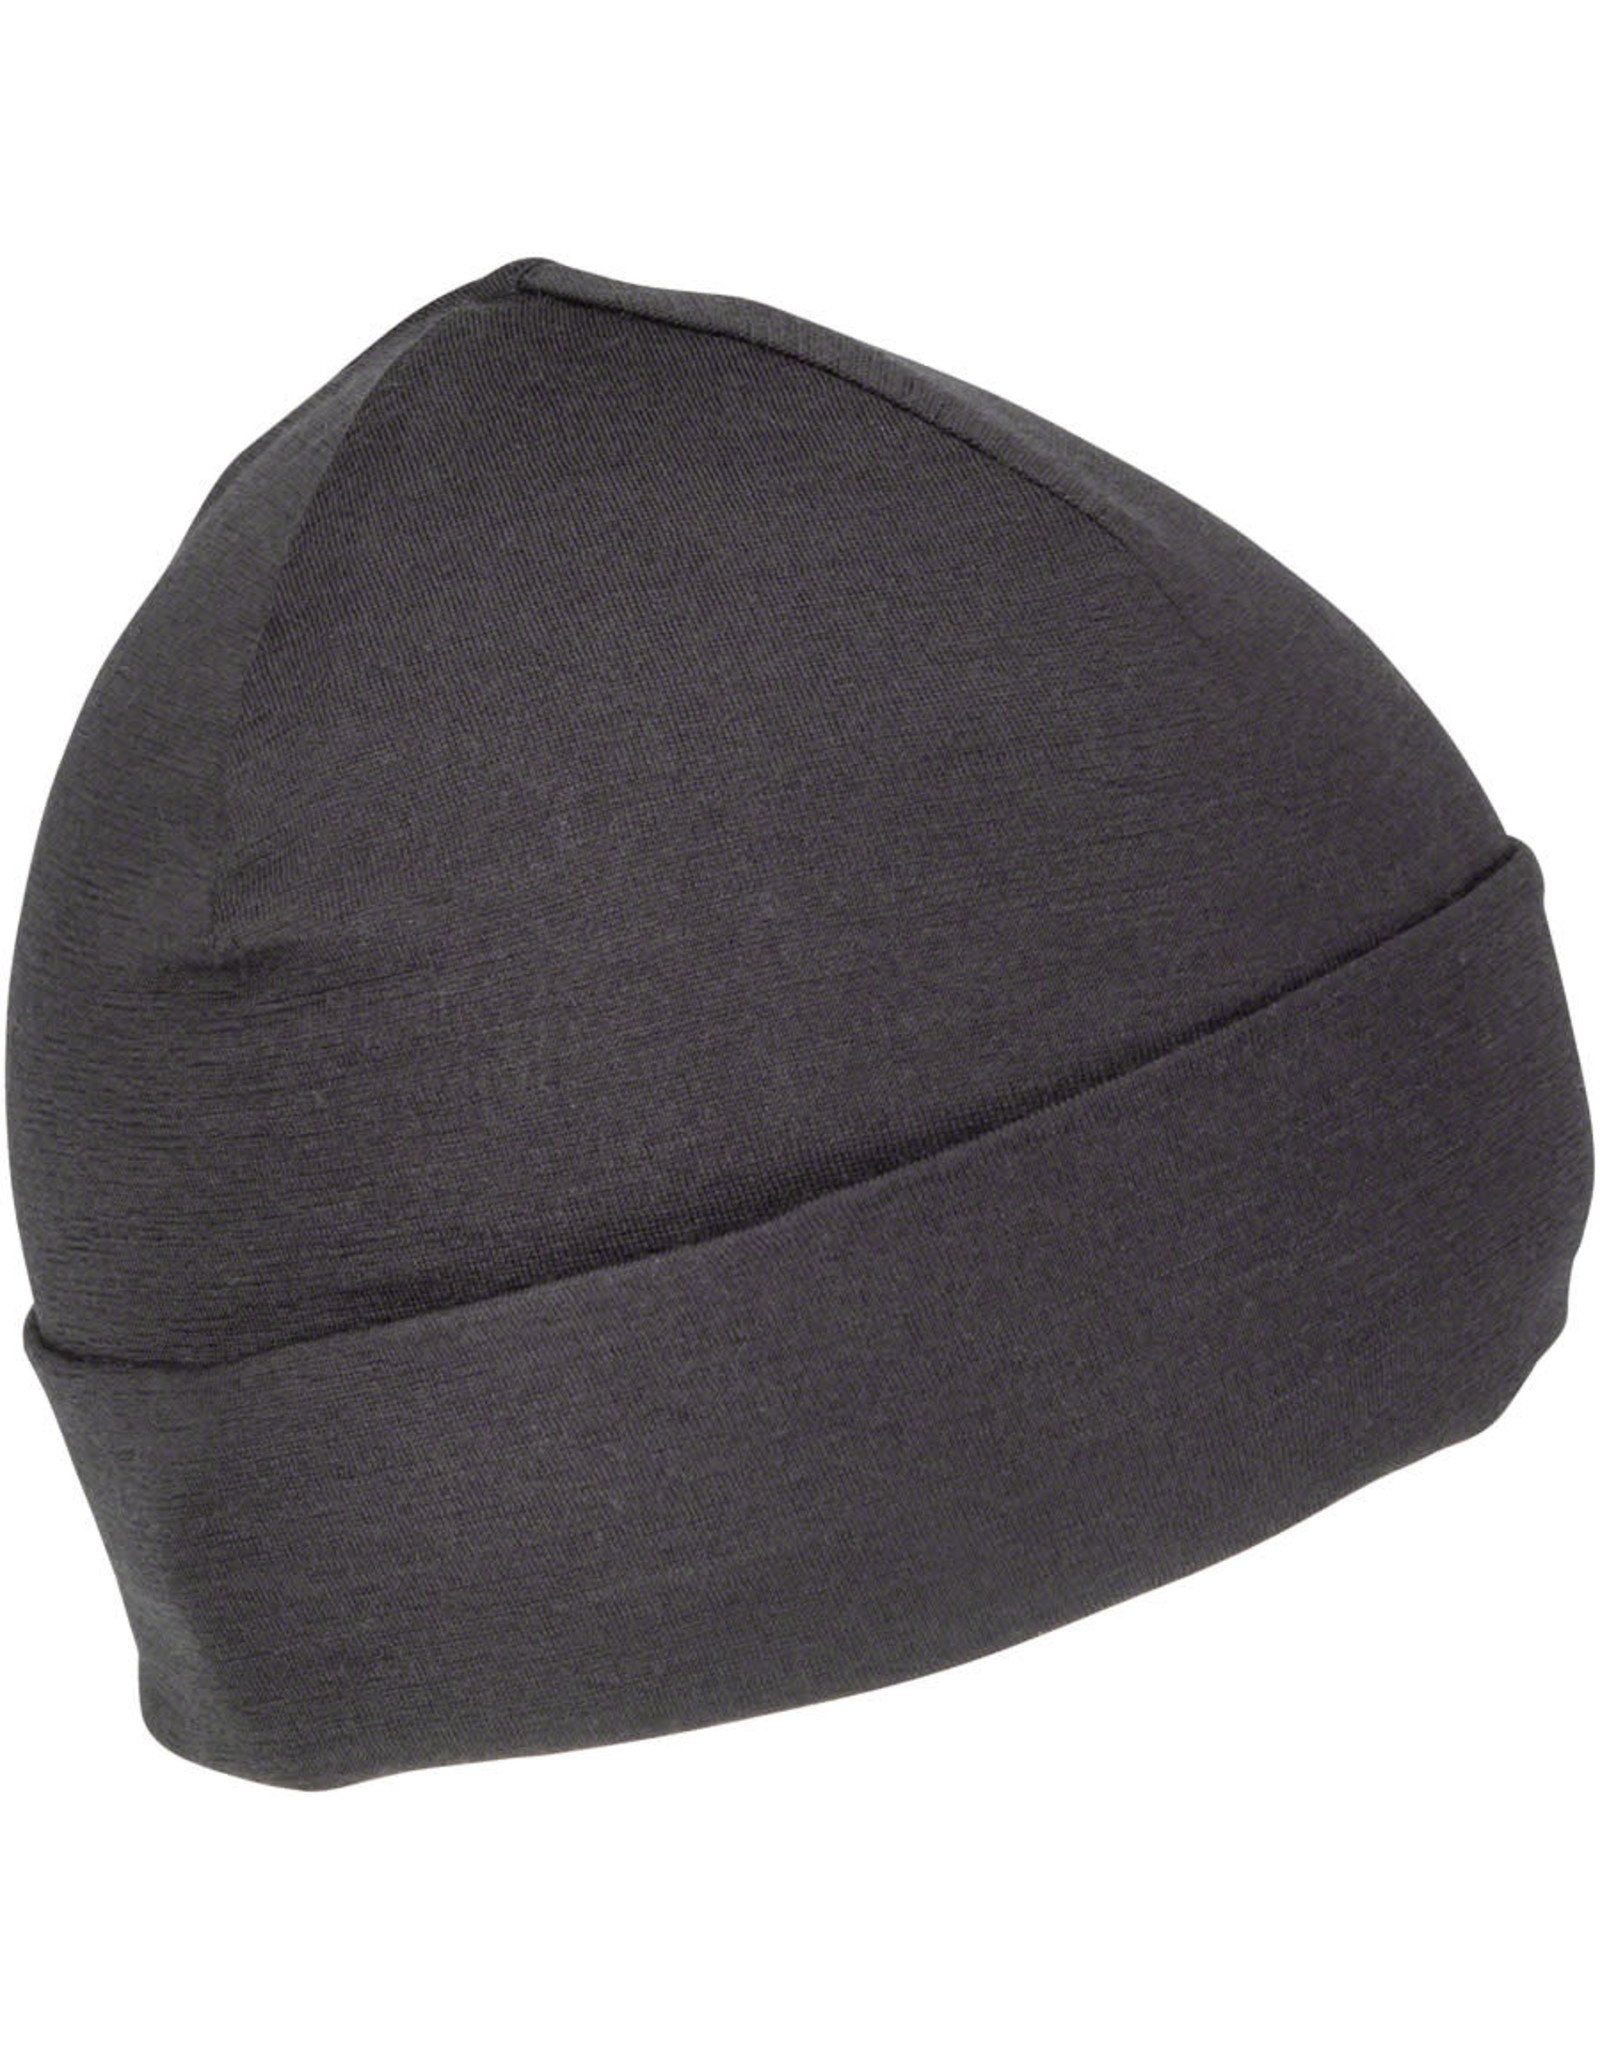 Surly Surly Wool Beanie - Black, 150gm, One Size